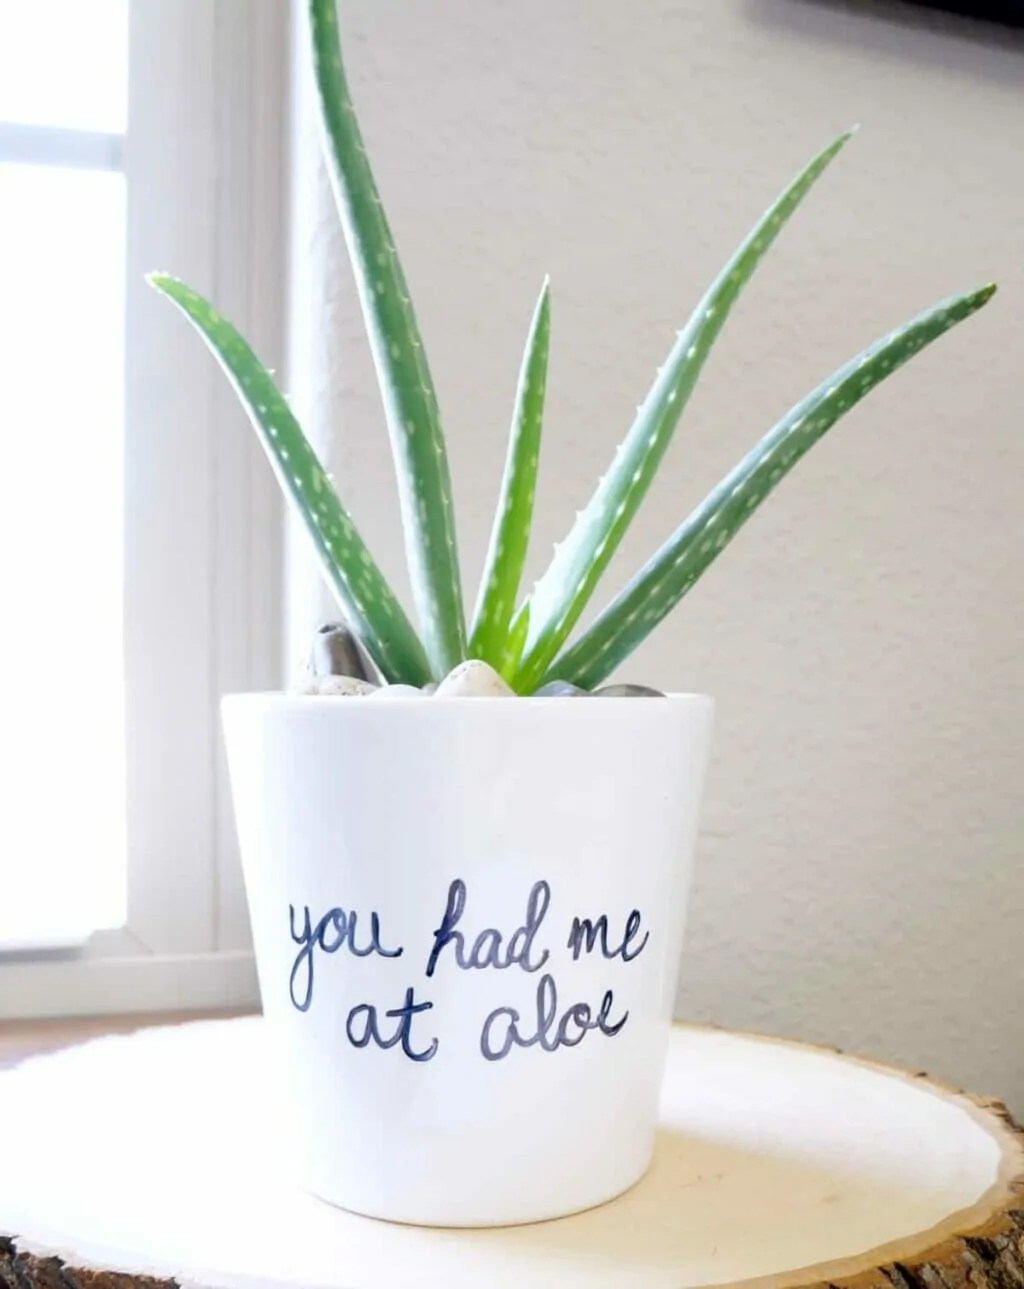 a small white plant pot sits on a wood round with an aloe plant in it. In handwritten  paint pen it says "you had me at aloe"